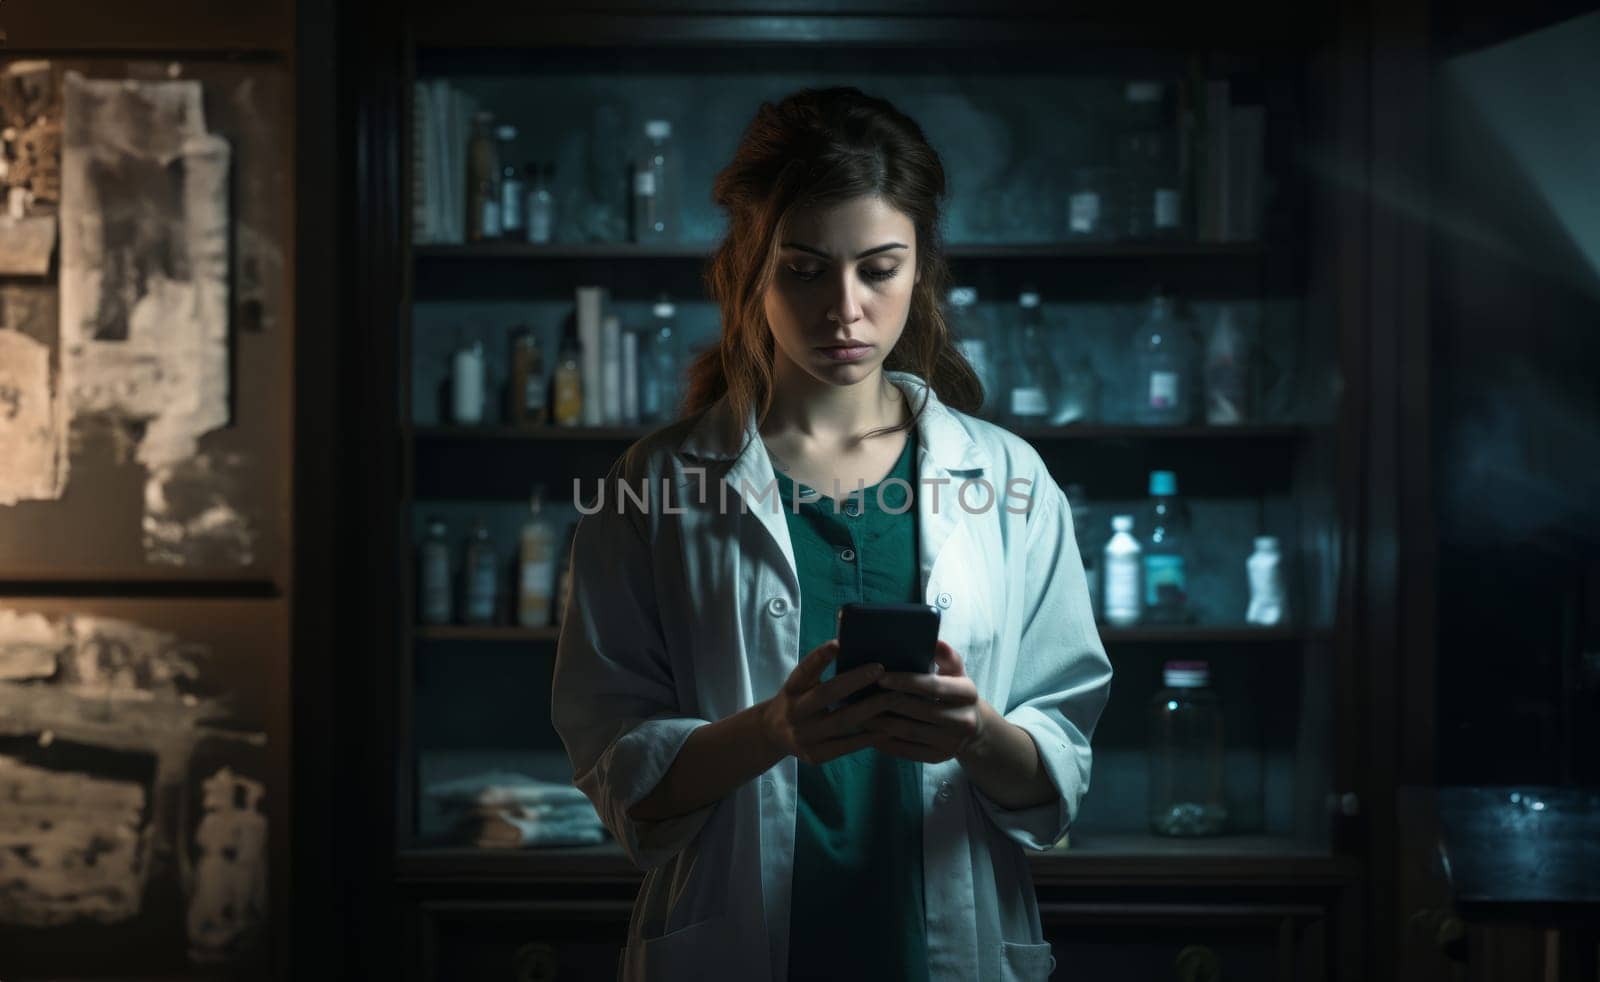 Doctor Uses Smartphone to Check Medication Inventory in Pharmacy.Generated image by dotshock